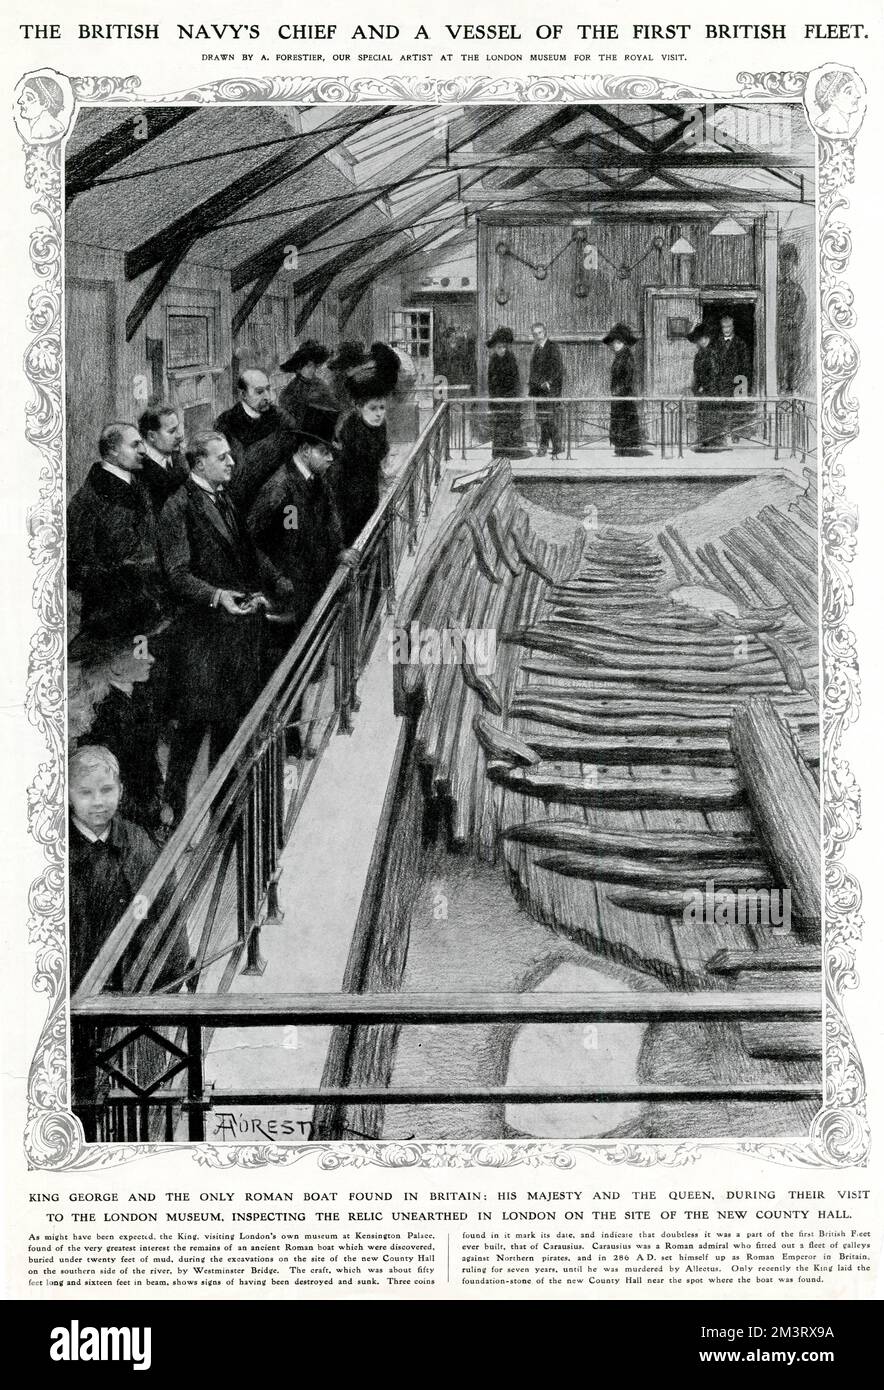 George V and Queen Mary inspecting the only Roman boat to be found in Britain during a visit to the London Museum.  The galley was unearthed in London on the site of the new County Hall.  The craft, which was about fifty feet long and sixteen feet wide, showed signs of having been destroyed or sunk.  Three coins found in it indicated it was from the time of Carausius, a Roman admiral who set himself as Roman Emperor of Britain in 286 A.D. ruling for seven years.      Date: 1912 Stock Photo